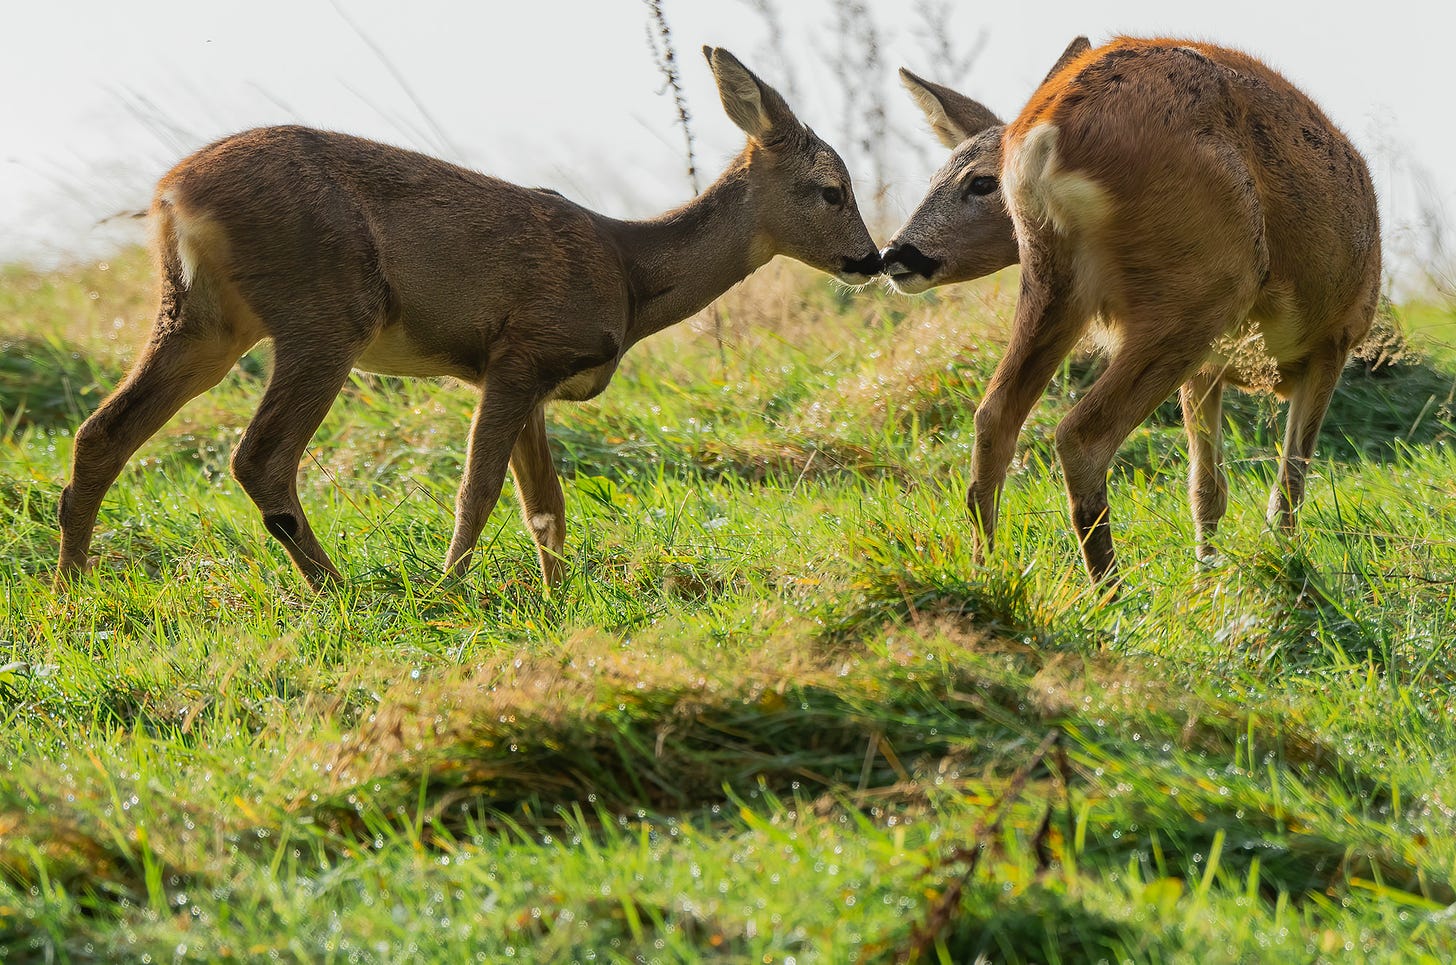 Photo of a roe deer kid touching noses with its mother